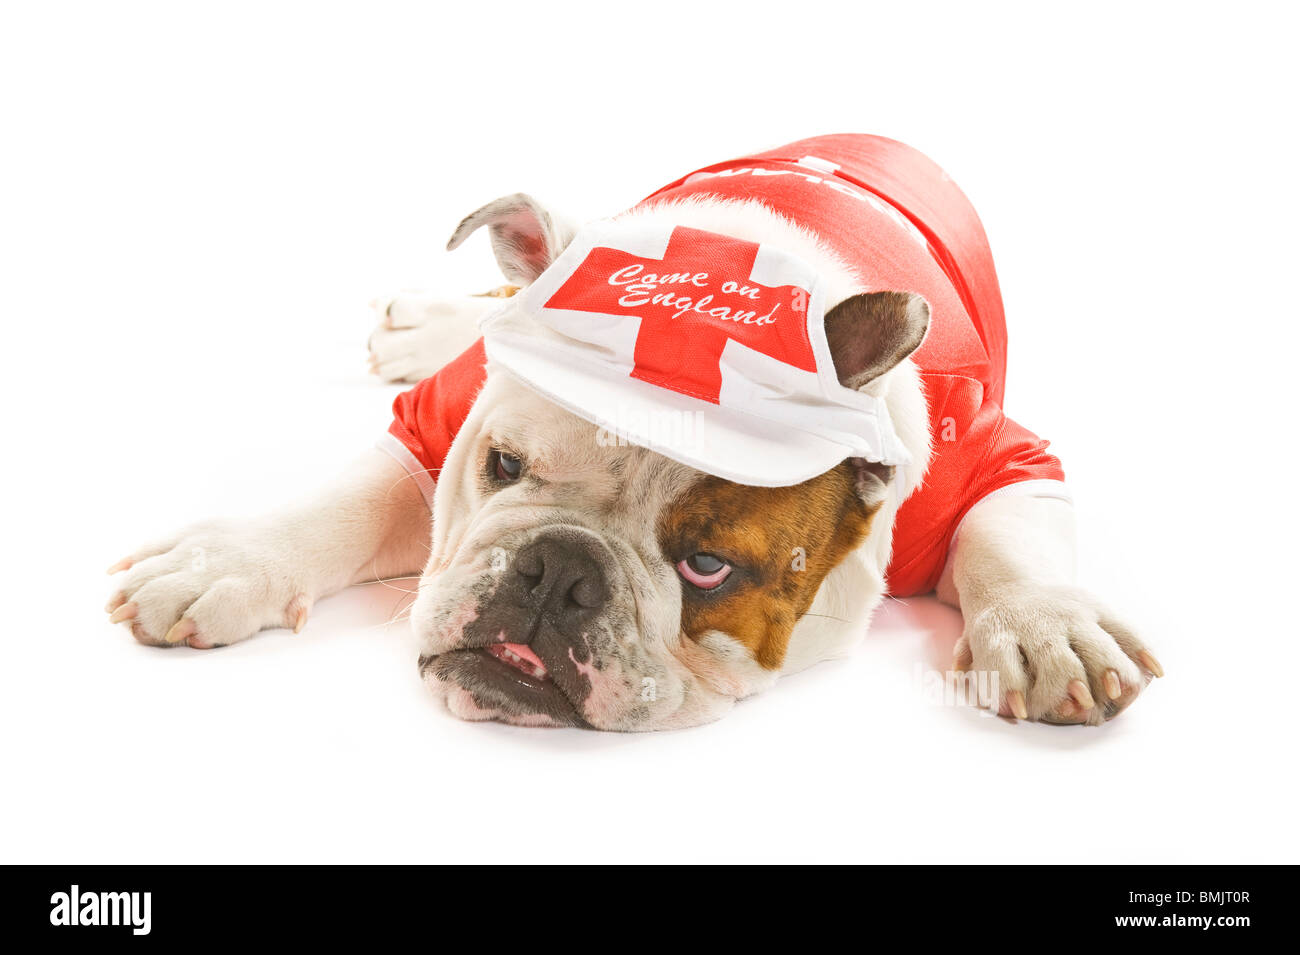 A British Bulldog lying down wearing an England team football shirt and cap against a white background looking quite fed up. Stock Photo